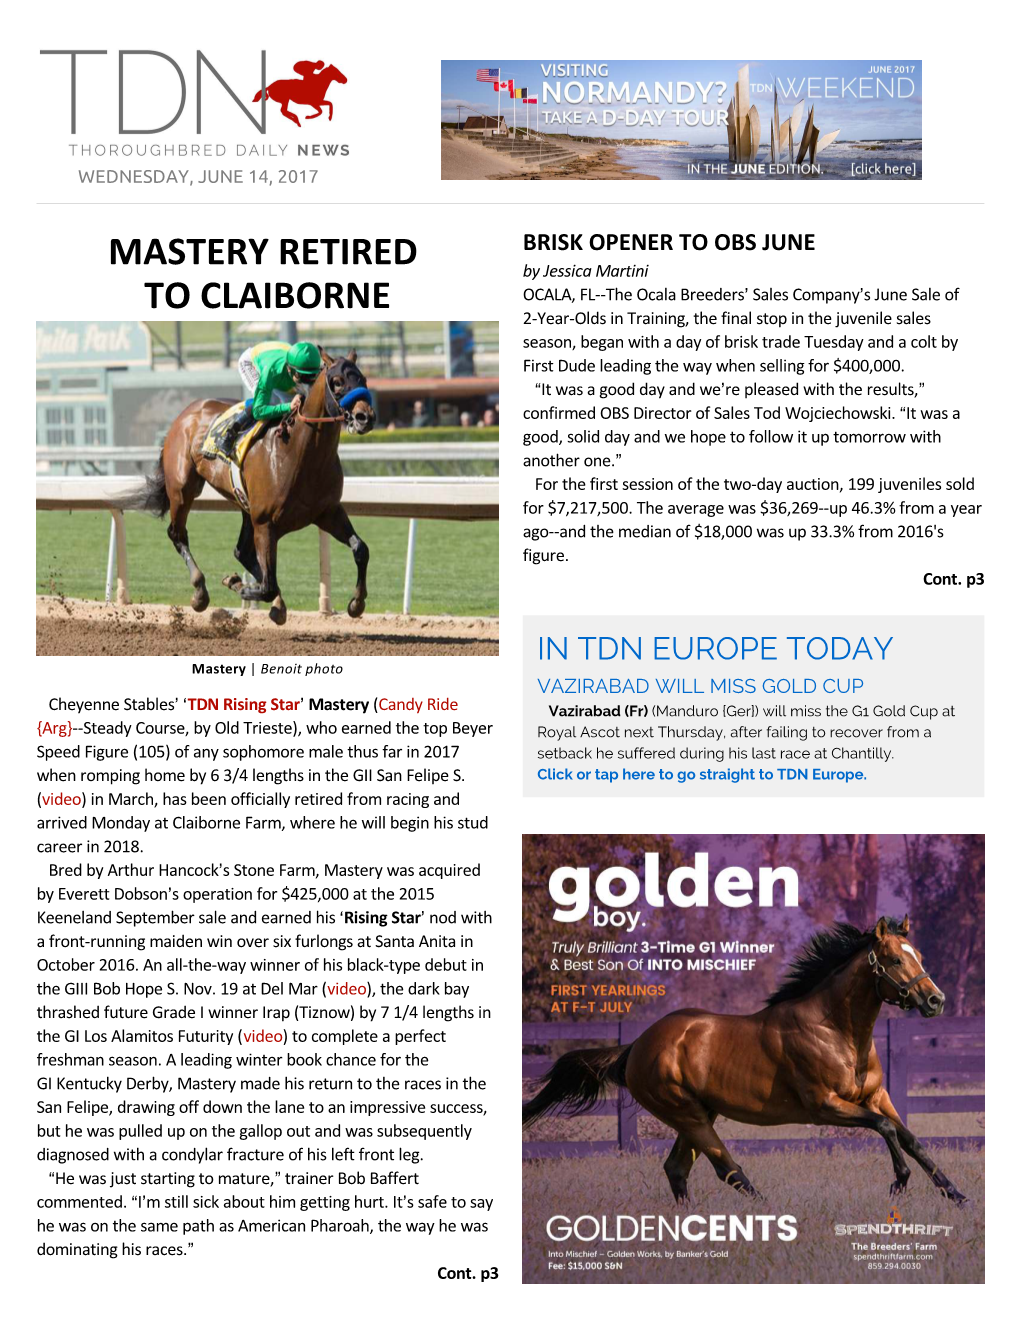 Mastery Retired to Claiborne Cont